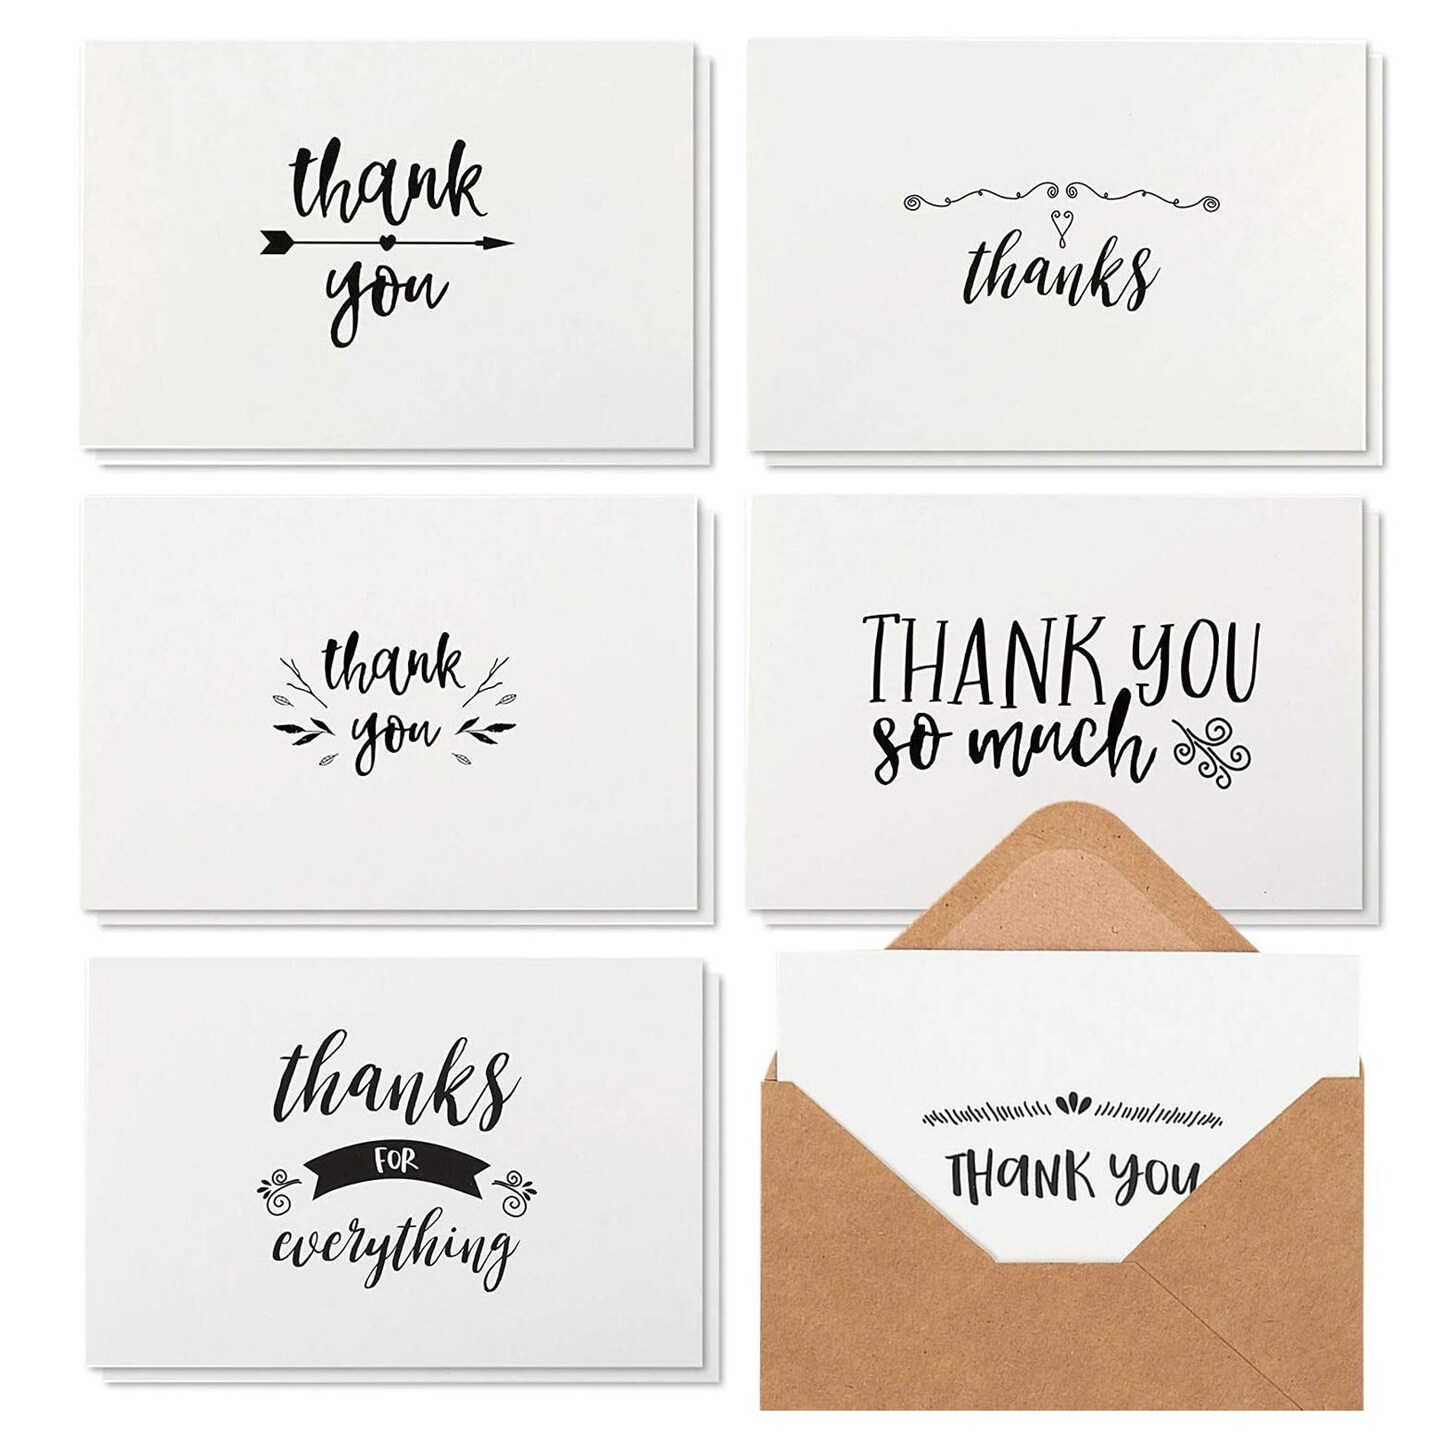 48 Pack Black and White Thank You Cards with Kraft Paper Envelopes for Graduation, Wedding, Blank Inside (4 x 6 In)